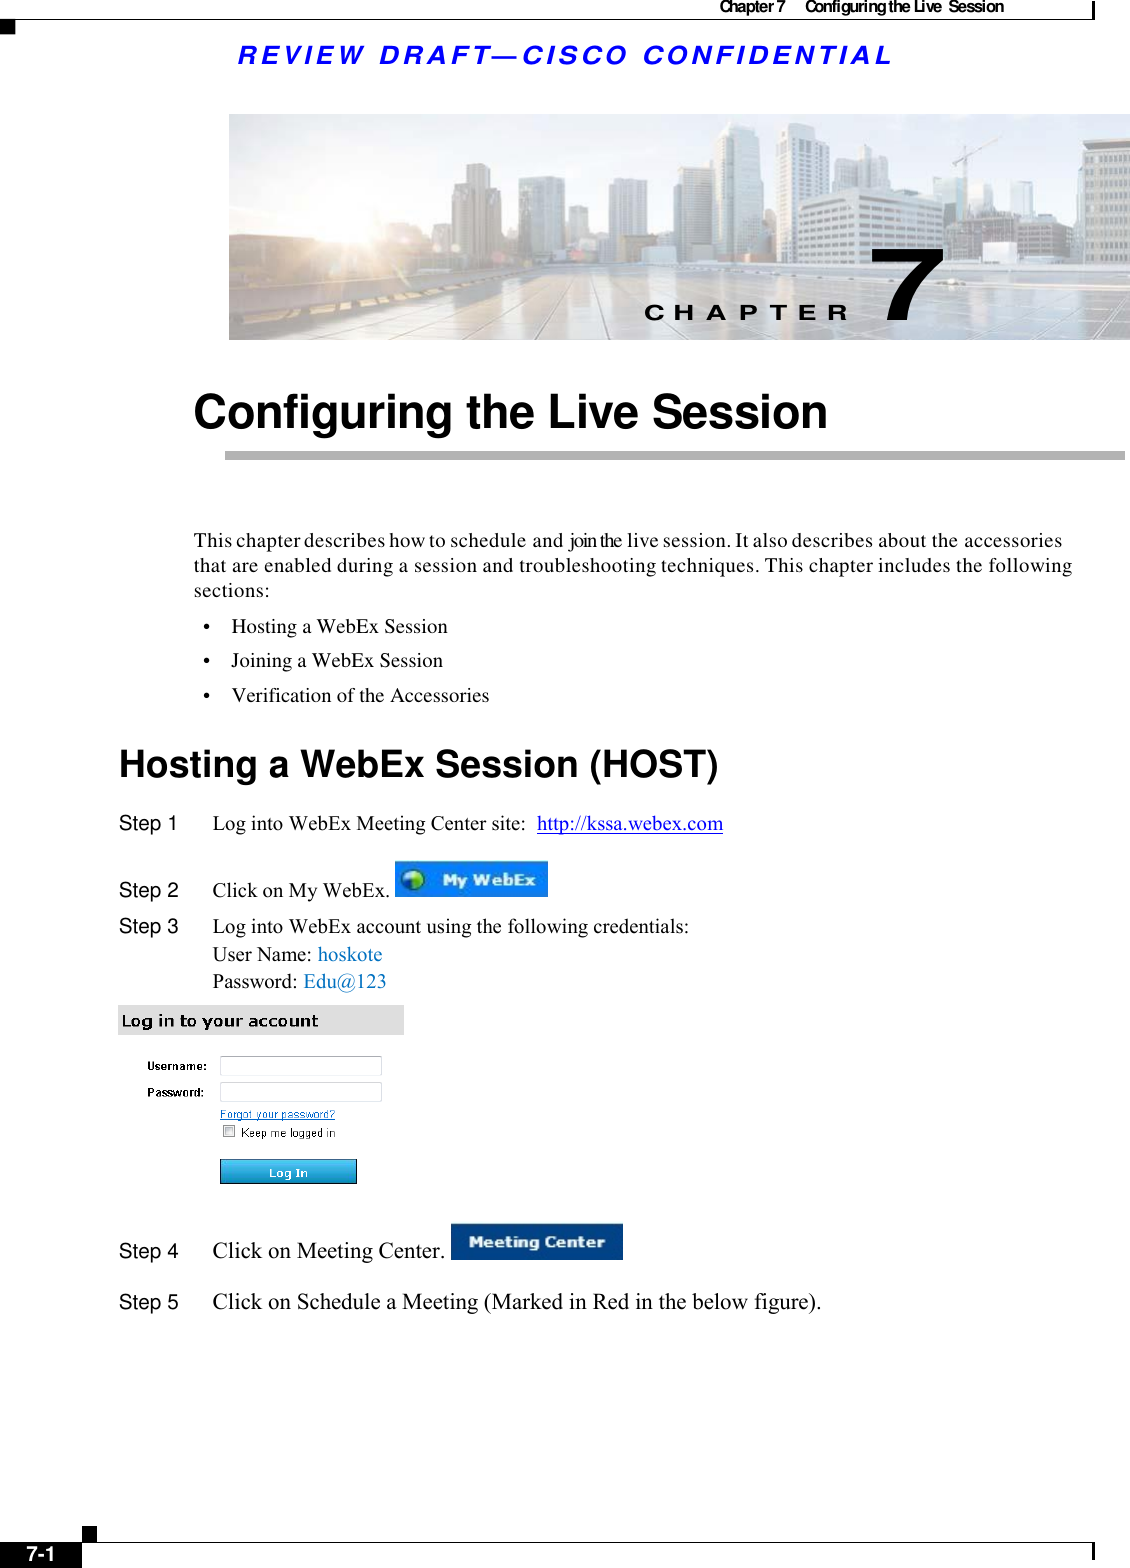 Chapter 7  Configuring the Live  Session  R E V I E W  DR AFT — CISC O  C O NF IDE N TIAL          C H A P T E R  7   Configuring the Live Session     This chapter describes how to schedule and join the live session. It also describes about the accessories that are enabled during a session and troubleshooting techniques. This chapter includes the following sections: •    Hosting a WebEx Session •    Joining a WebEx Session  •    Verification of the Accessories  Hosting a WebEx Session (HOST) Step 1  Log into WebEx Meeting Center site:  http://kssa.webex.com  Step 2  Click on My WebEx.    Step 3  Log into WebEx account using the following credentials: User Name: hoskote Password: Edu@123  Step 4  Click on Meeting Center.          Step 5  Click on Schedule a Meeting (Marked in Red in the below figure).          7-1   